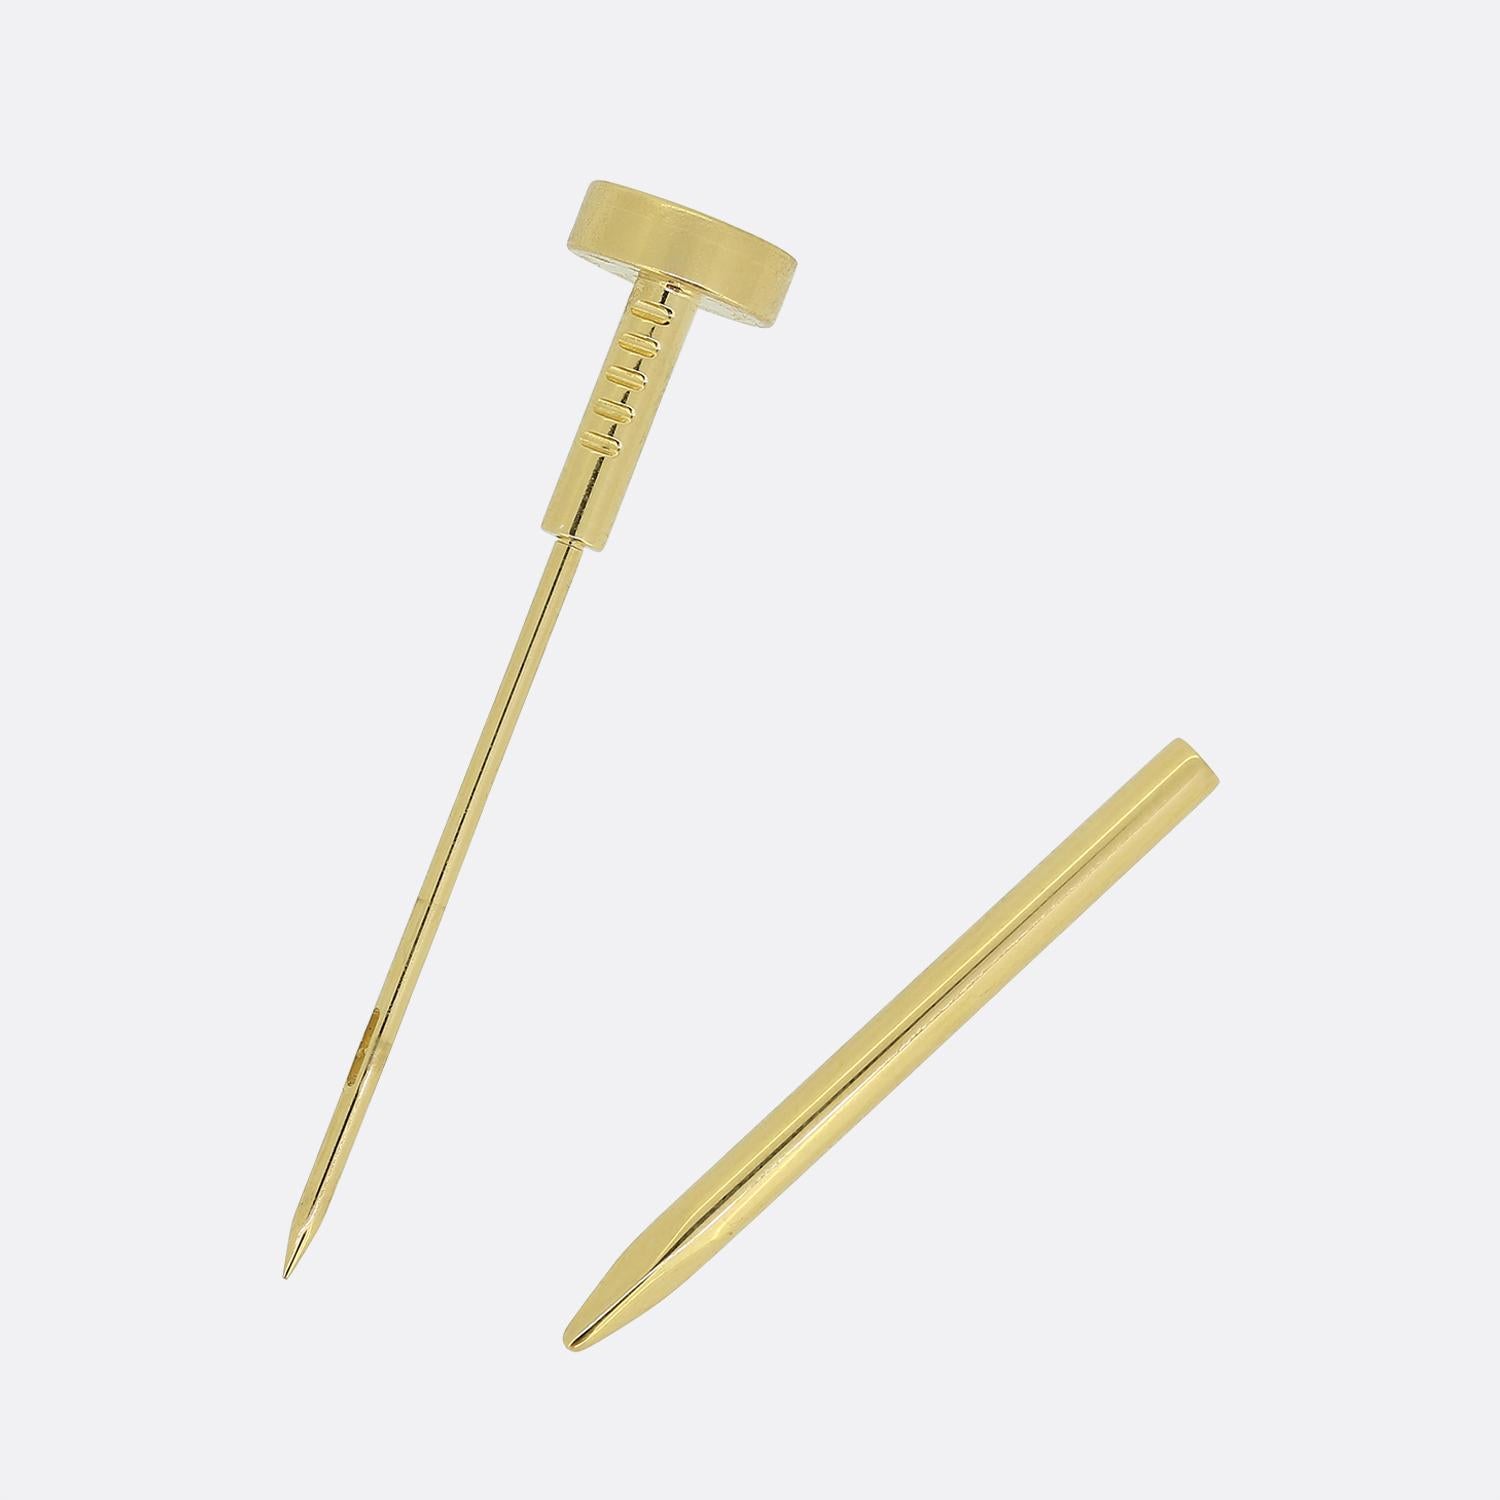 Here we have a fabulous tie pin from the world renowned jewellery house of Cartier. This piece forms part of their 'Juste un Clou' collection and showcases their iconic nail design; in this case being crafted from 18ct yellow gold. 

Condition: Used